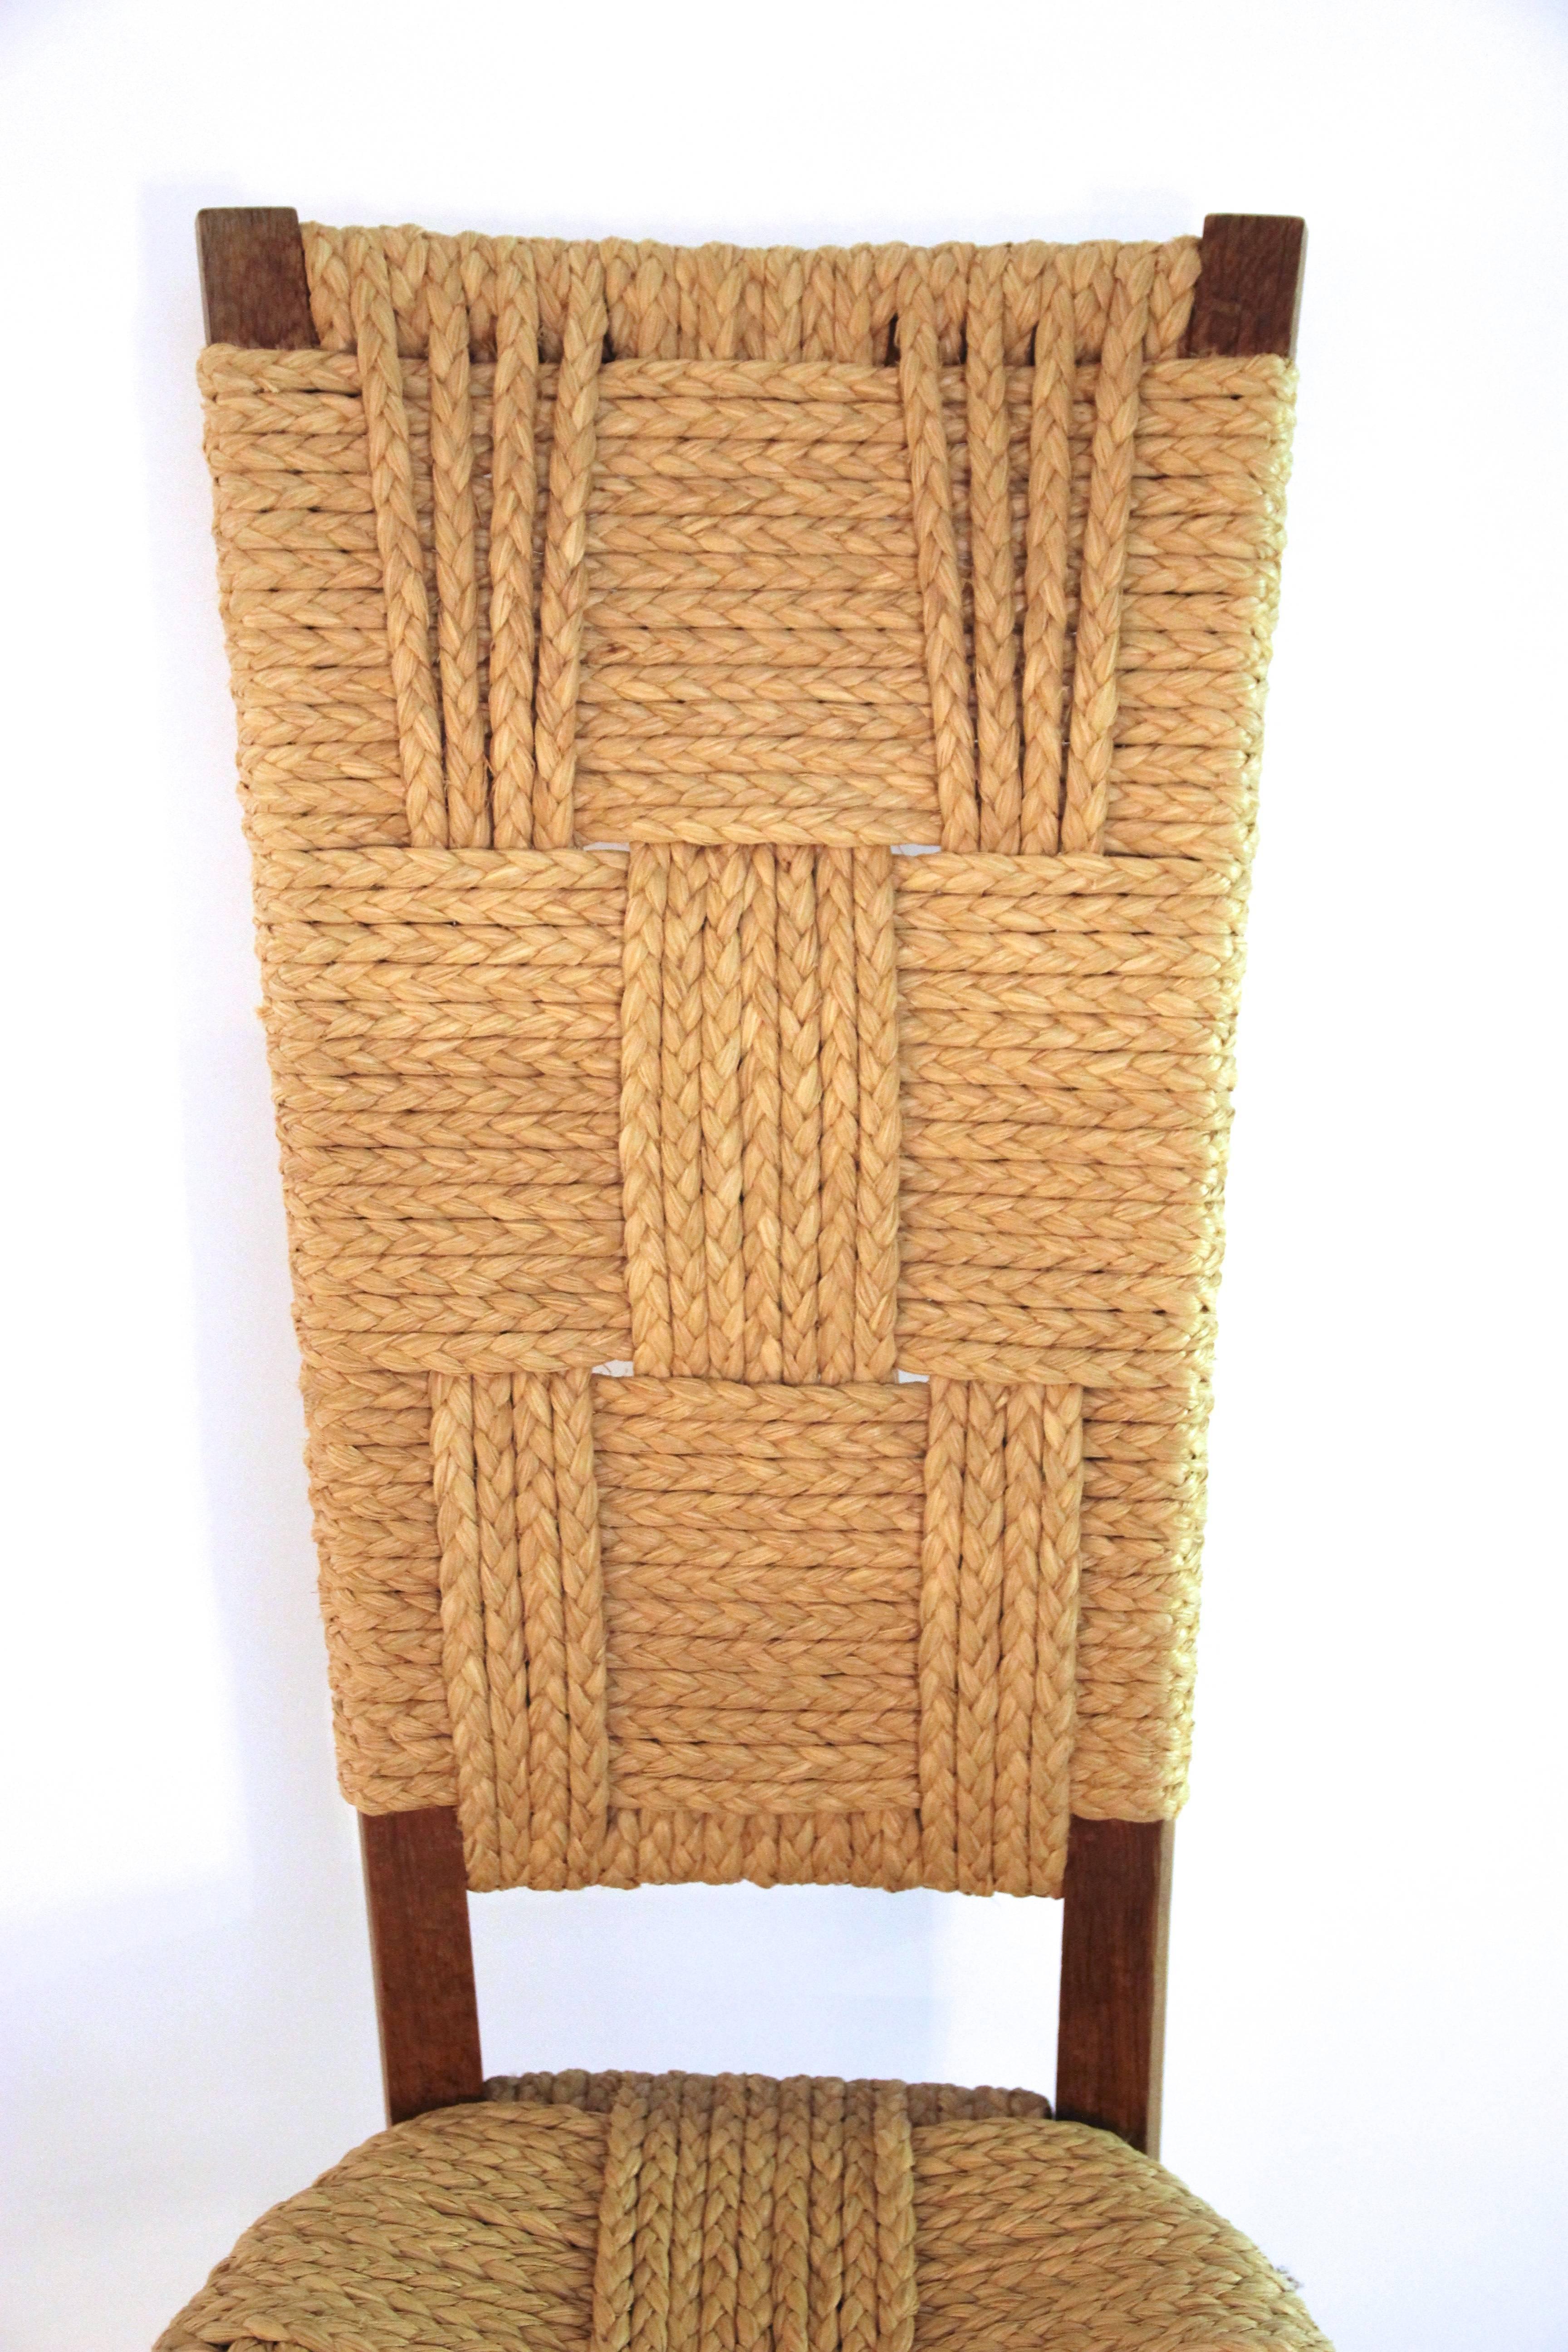 Modern Audoux-Minet, Suite of Four Chairs, Rattan and Wood, circa 1970, France